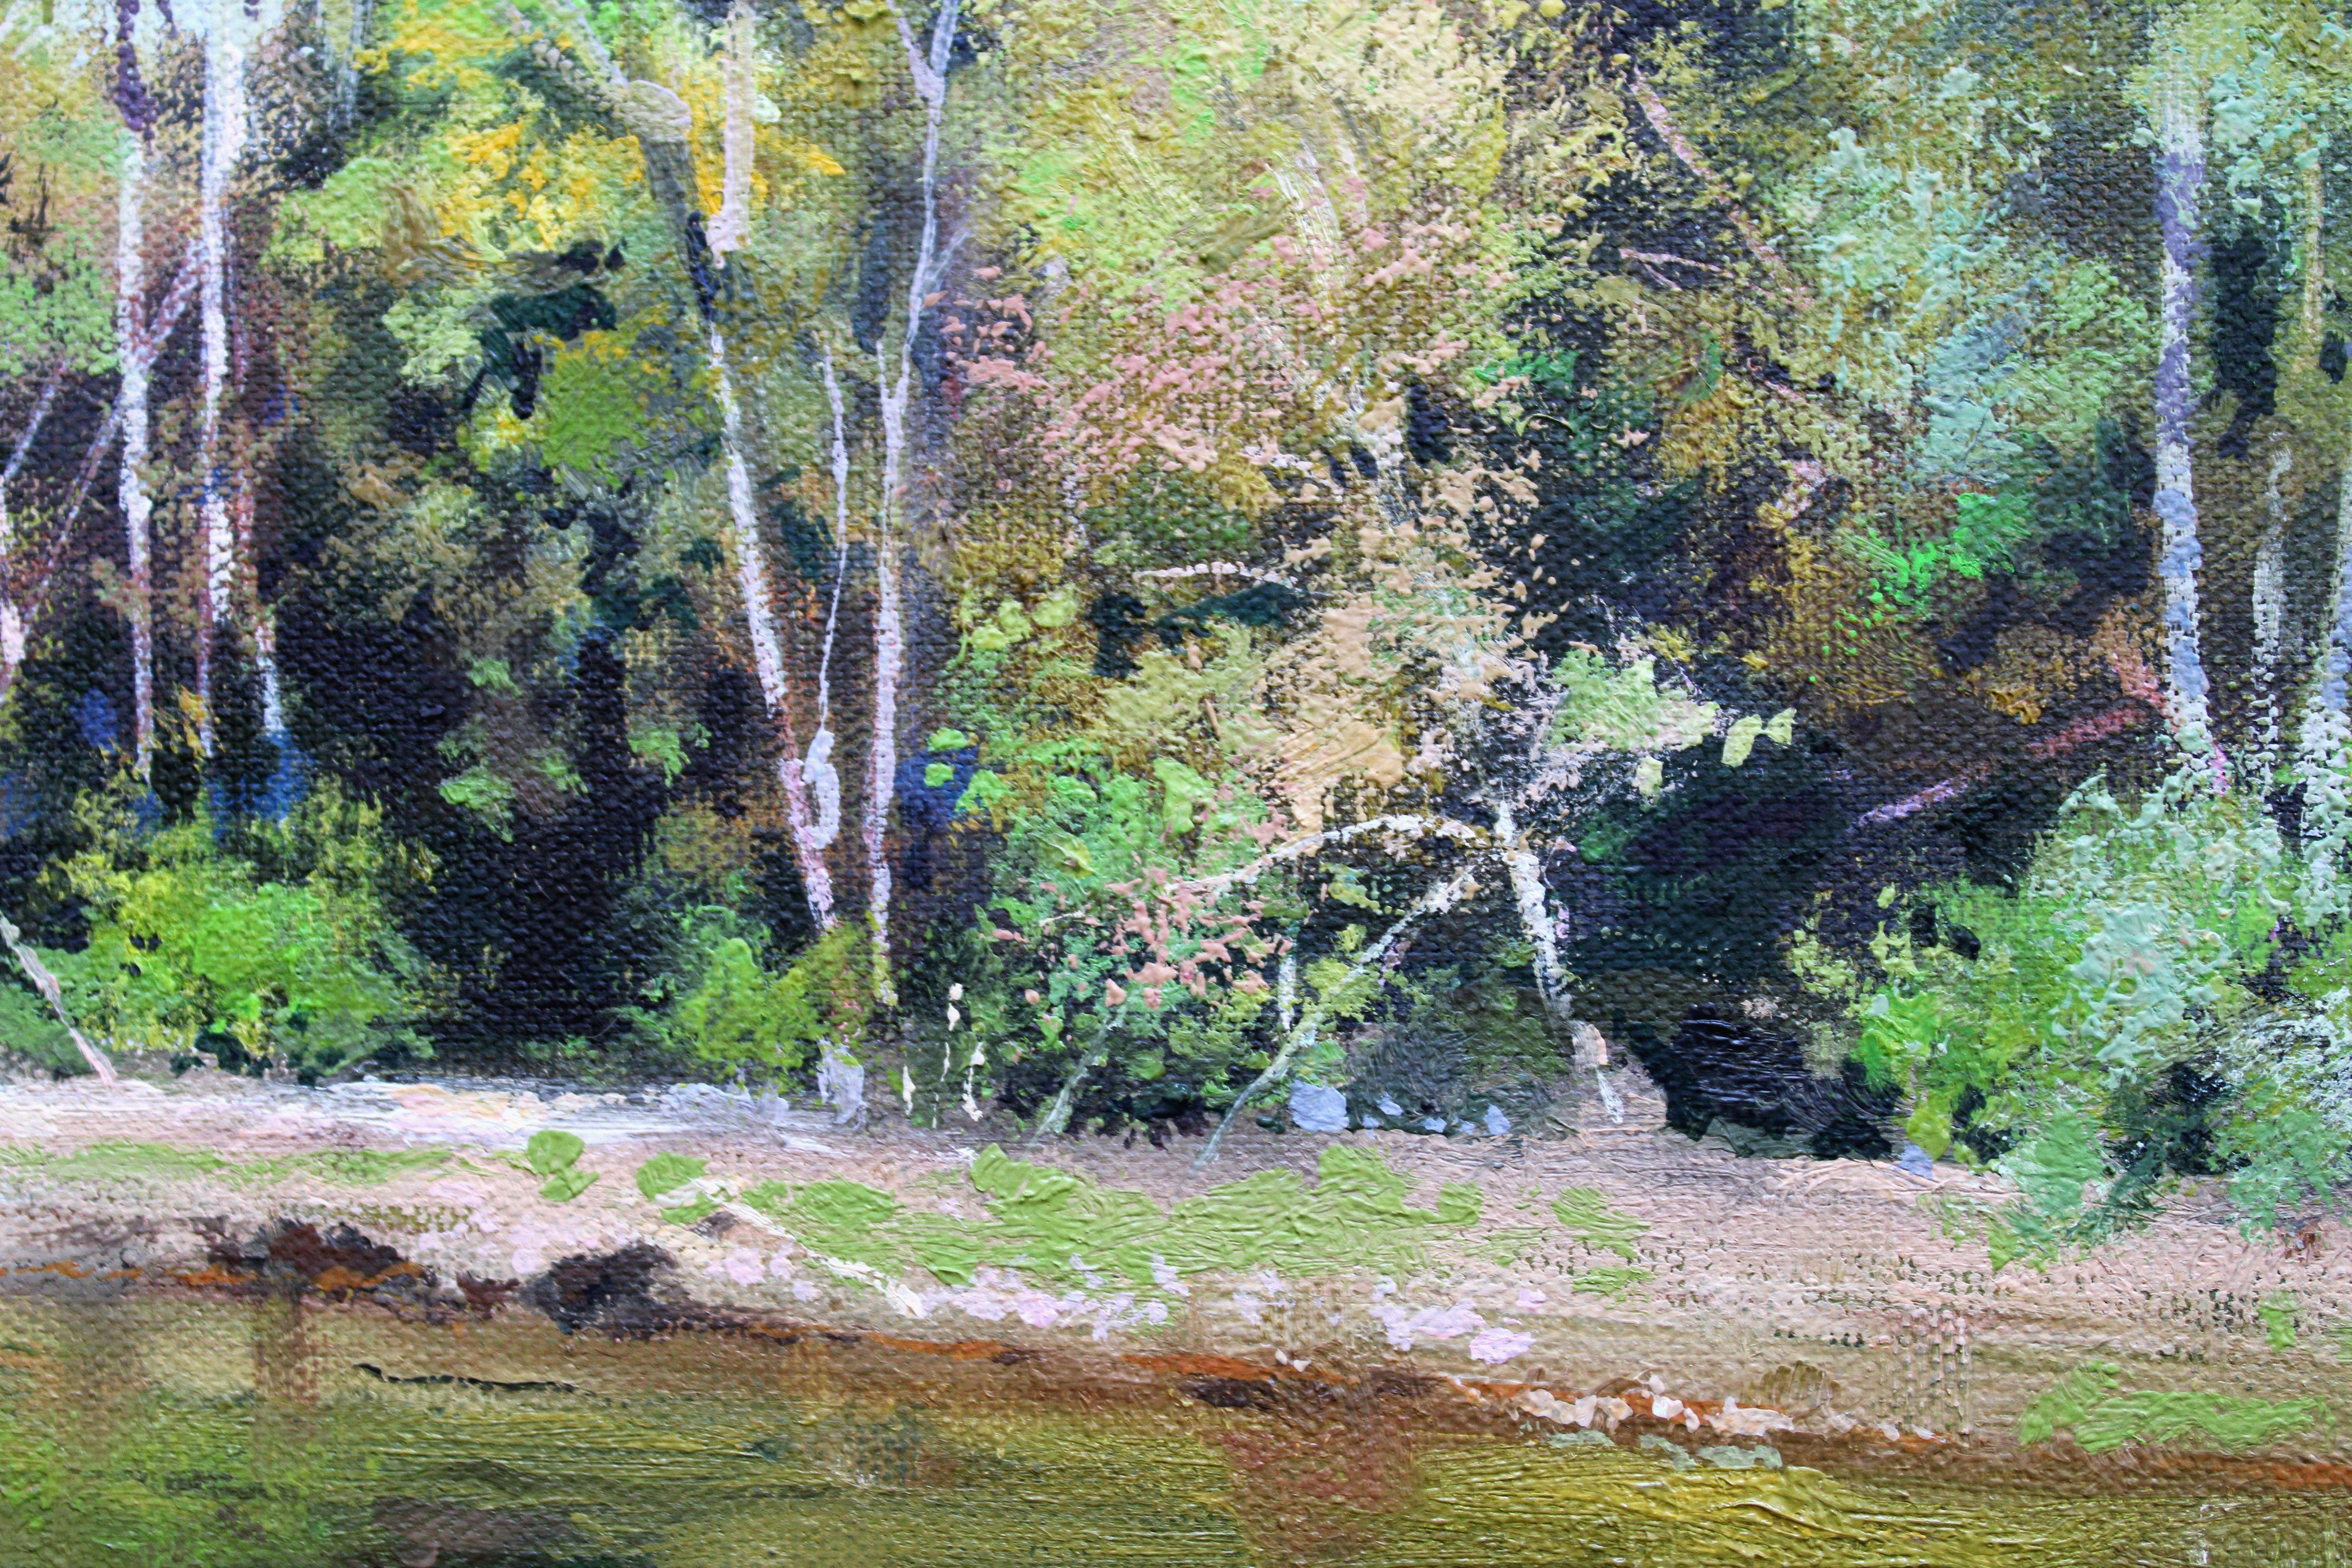 May. The Lobe River flows into Ogre. Oil on canvas, 40x50 cm - Realist Painting by Janis Zingitis